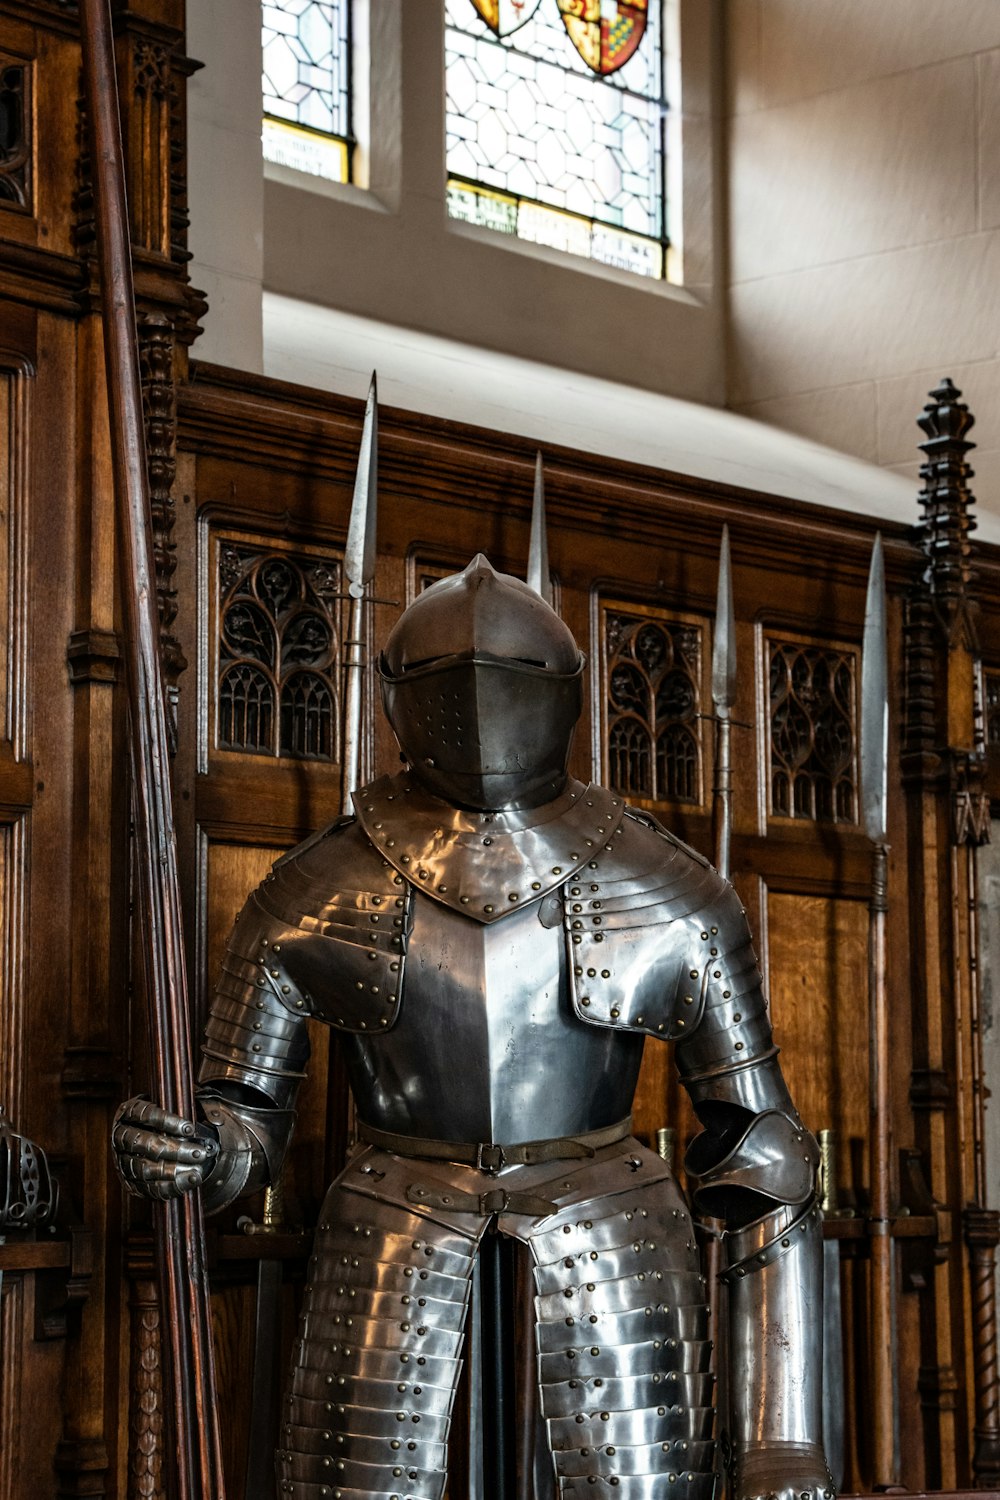 a statue of a knight holding a sword in front of a stained glass window